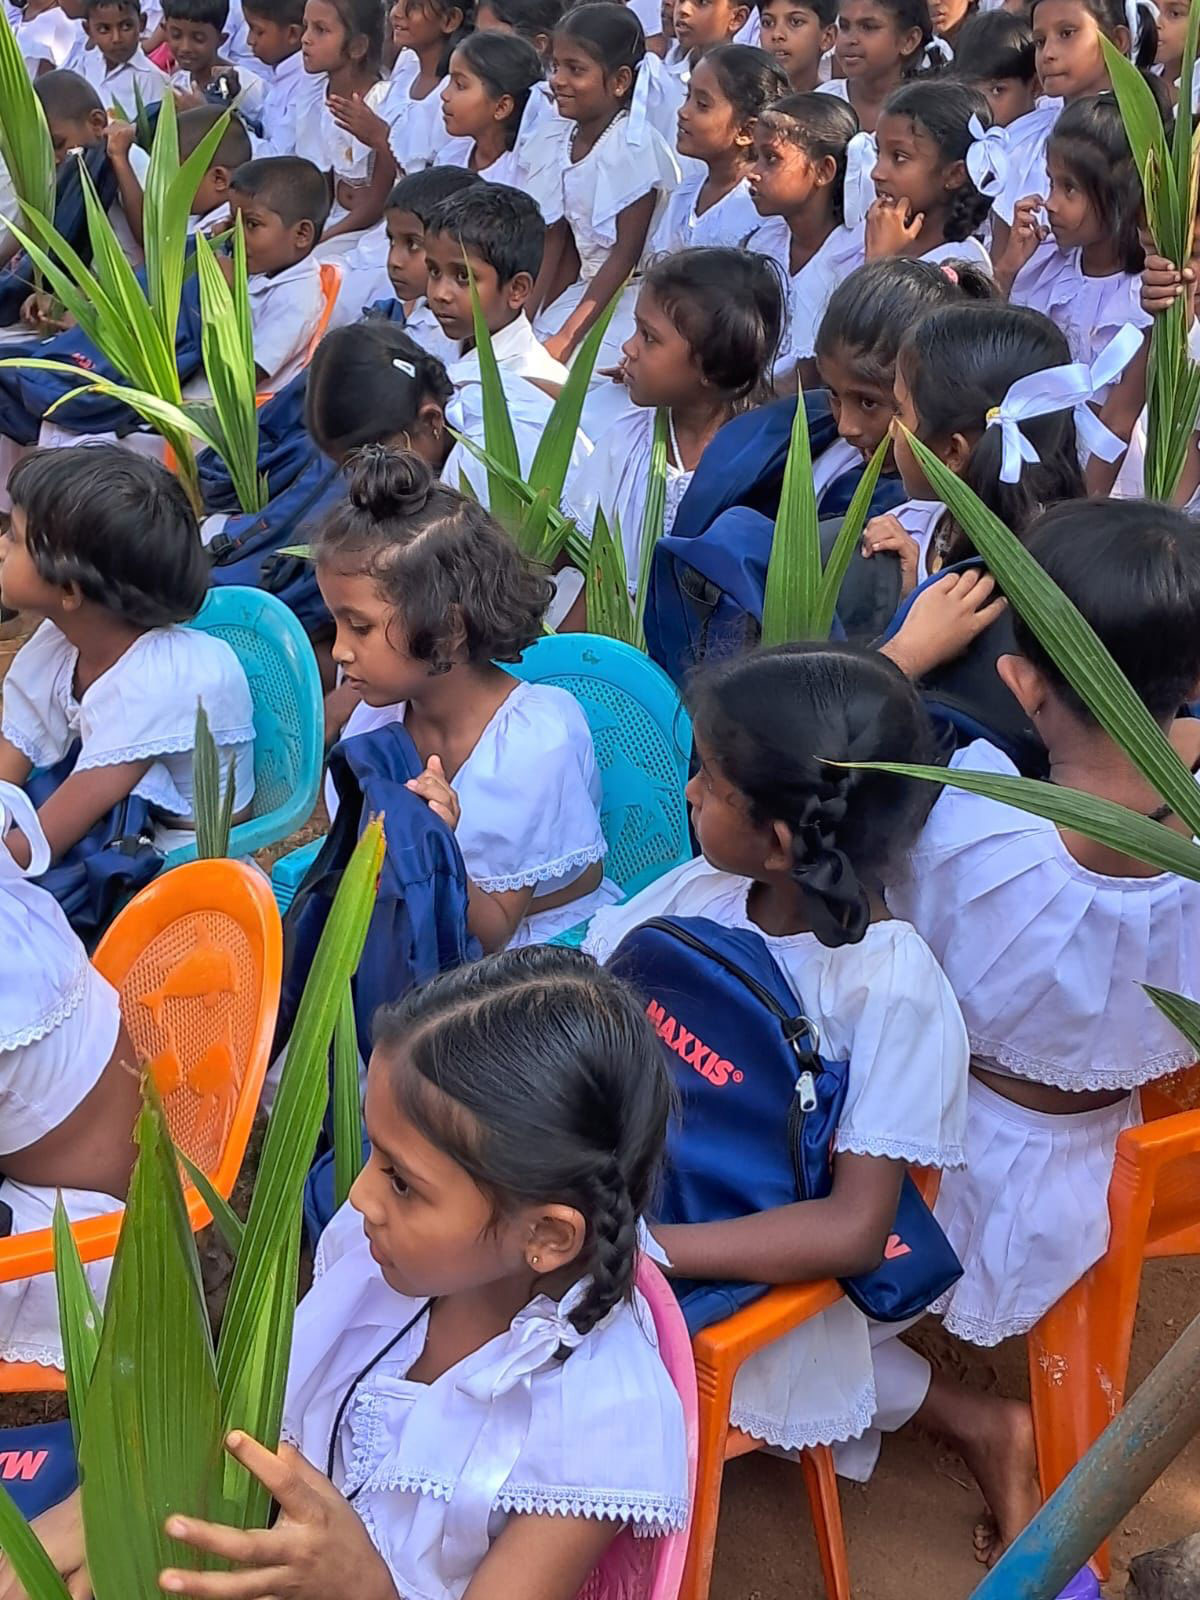 Children holding back packs and coconut trees.